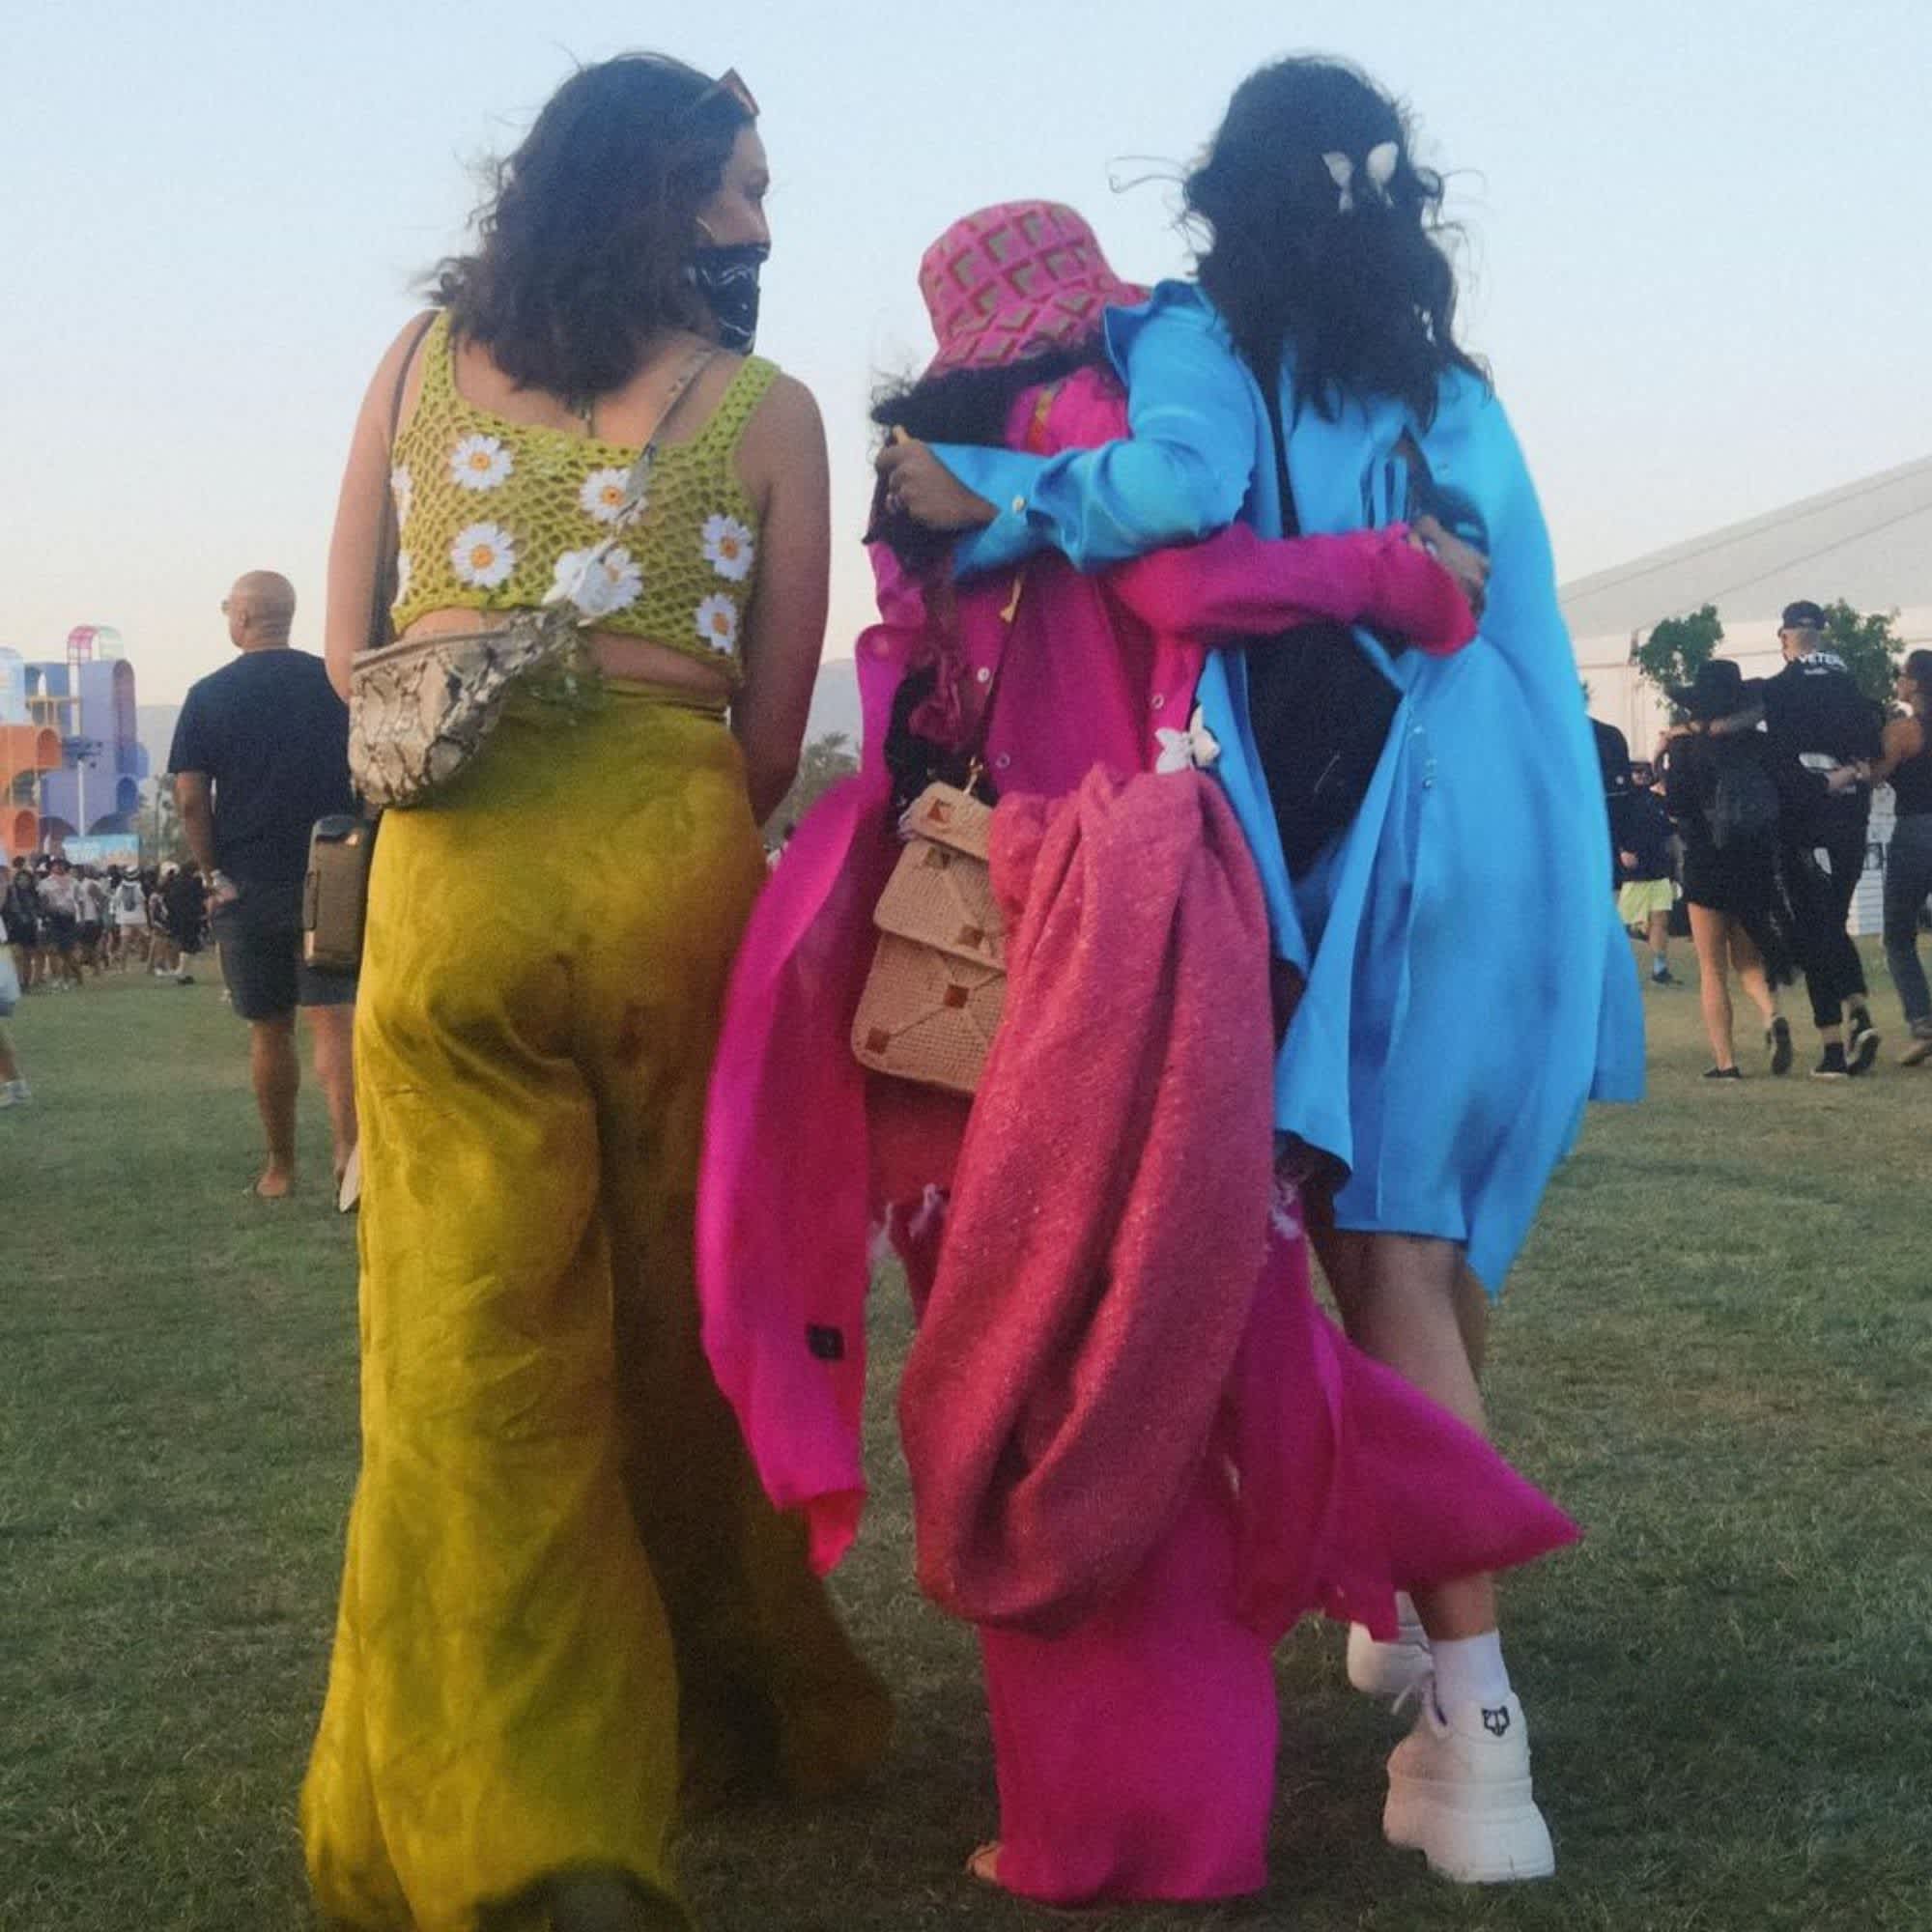 12 Festival Outfit Ideas for Curvy Babes, Courtesy of a Curve